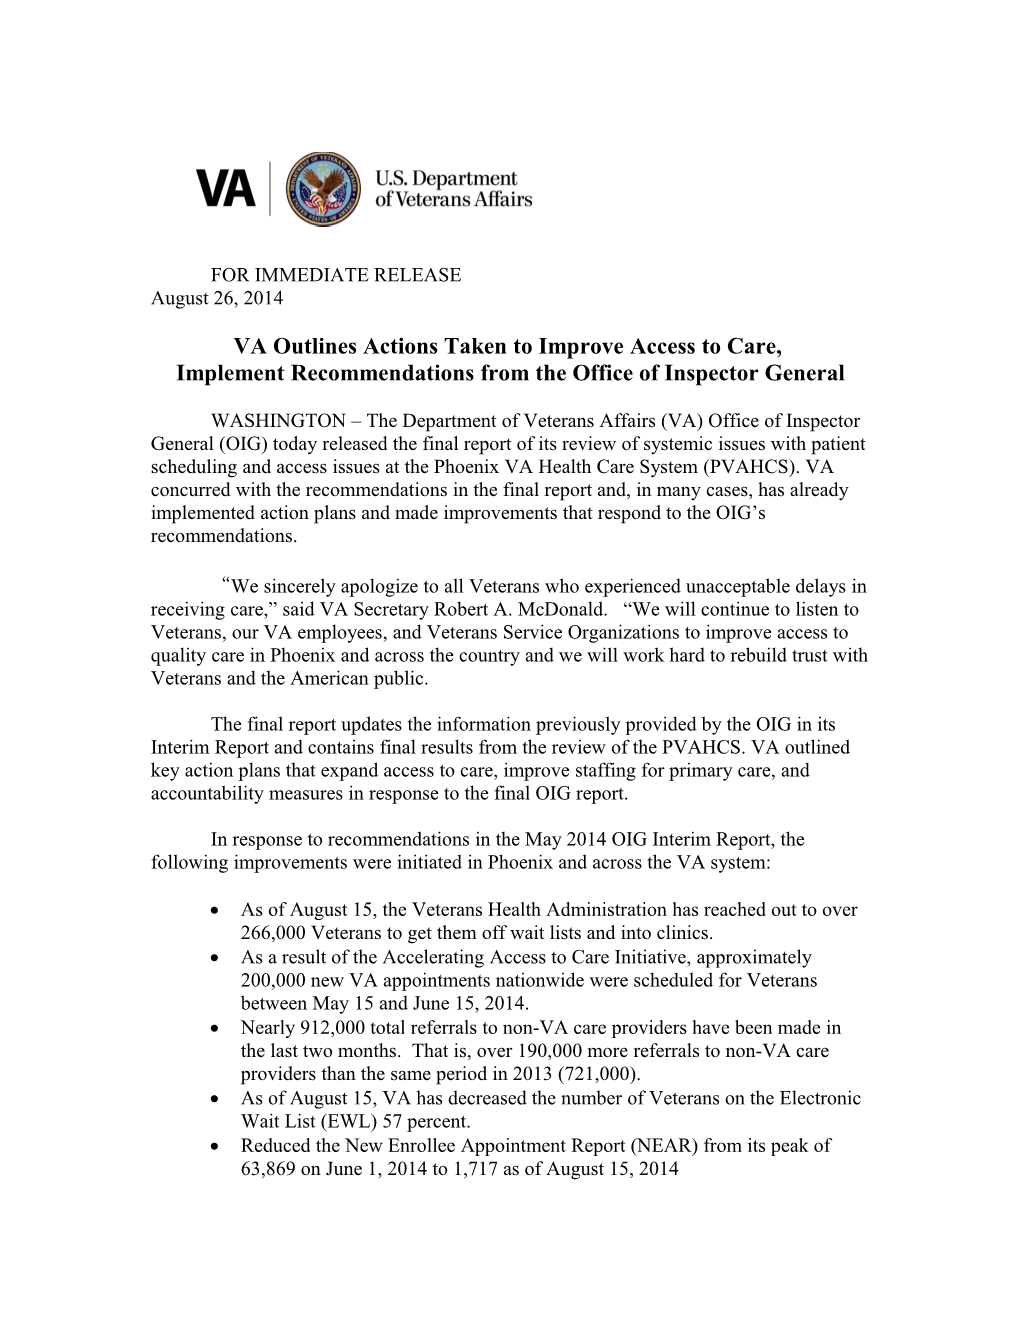 VA Outlines Actions Taken to Improve Access to Care